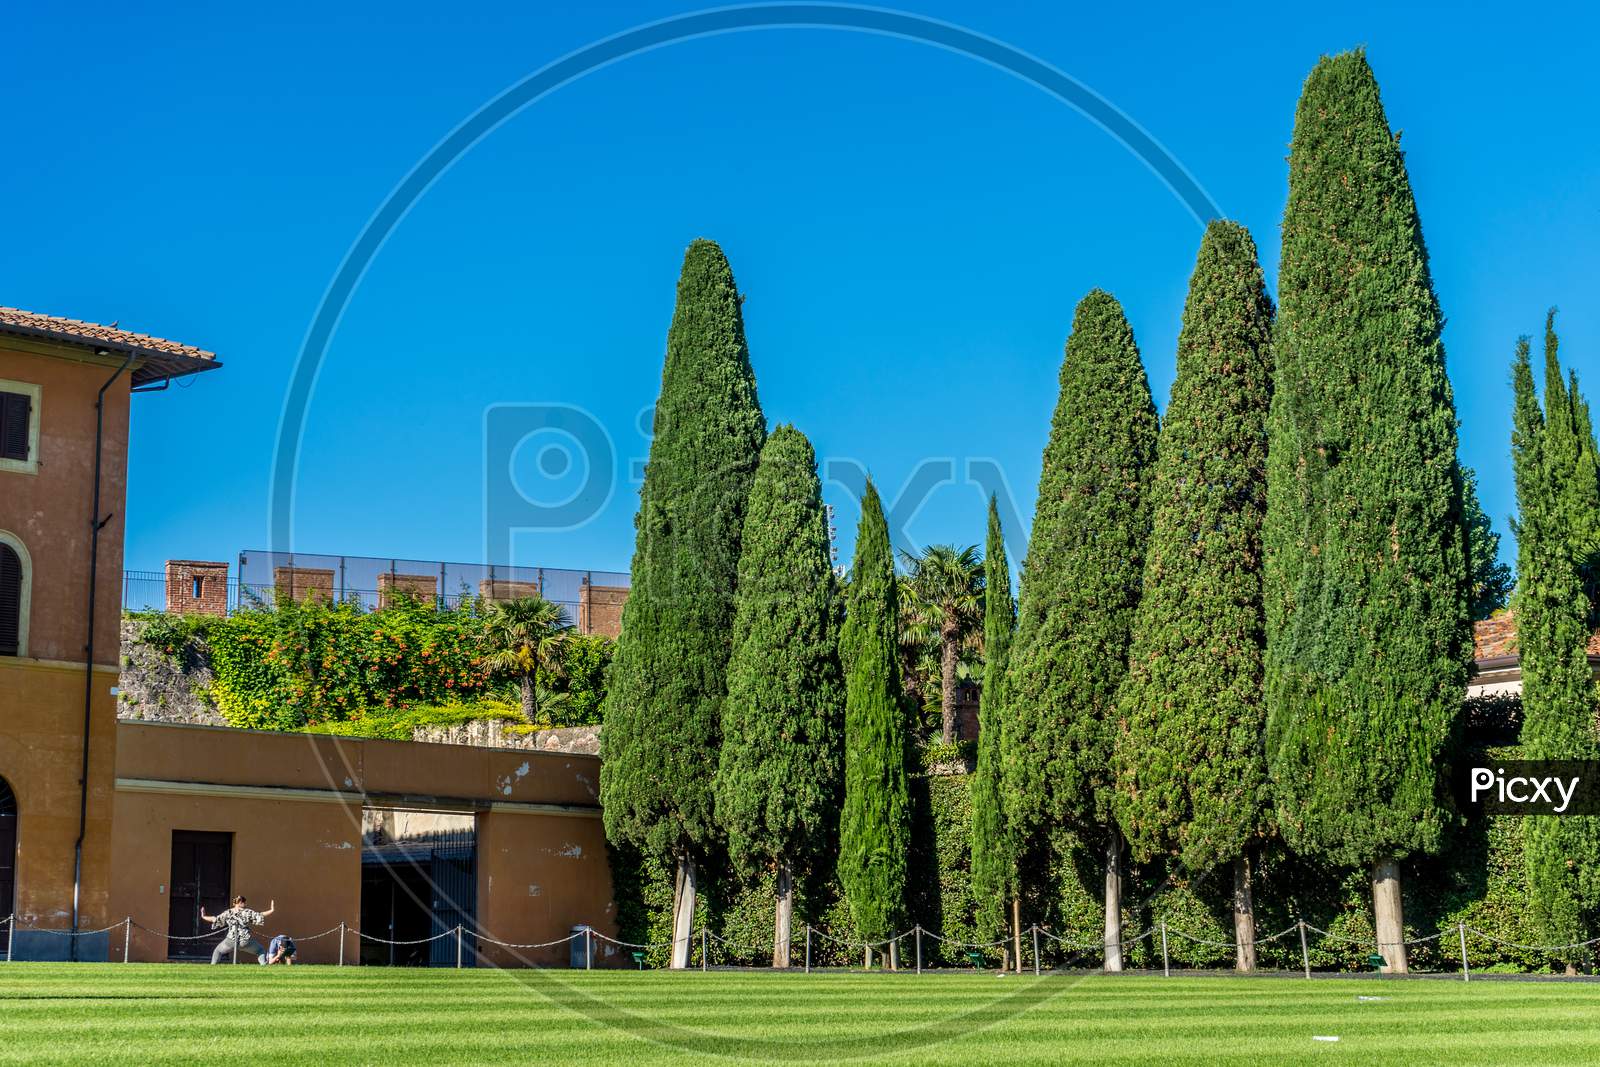 Italy,Pisa, A Group Of People In A Garden